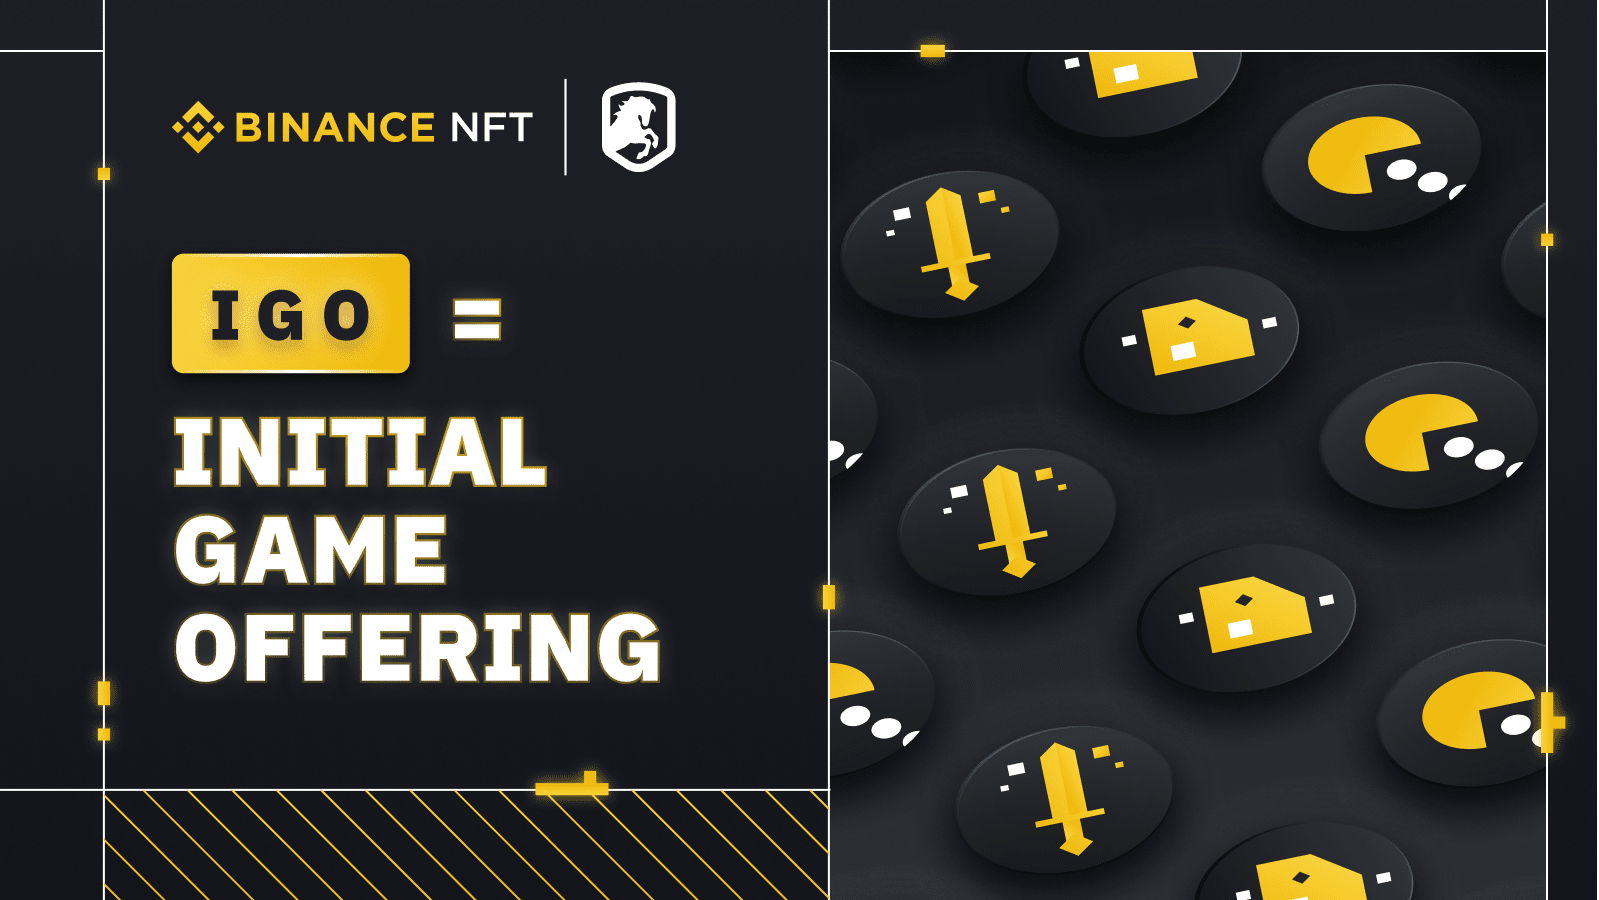 Binance NFT is written across the top with the words INITIAL GAME OFFERING BELOW. The background is black and features yellow Pacman like animations.